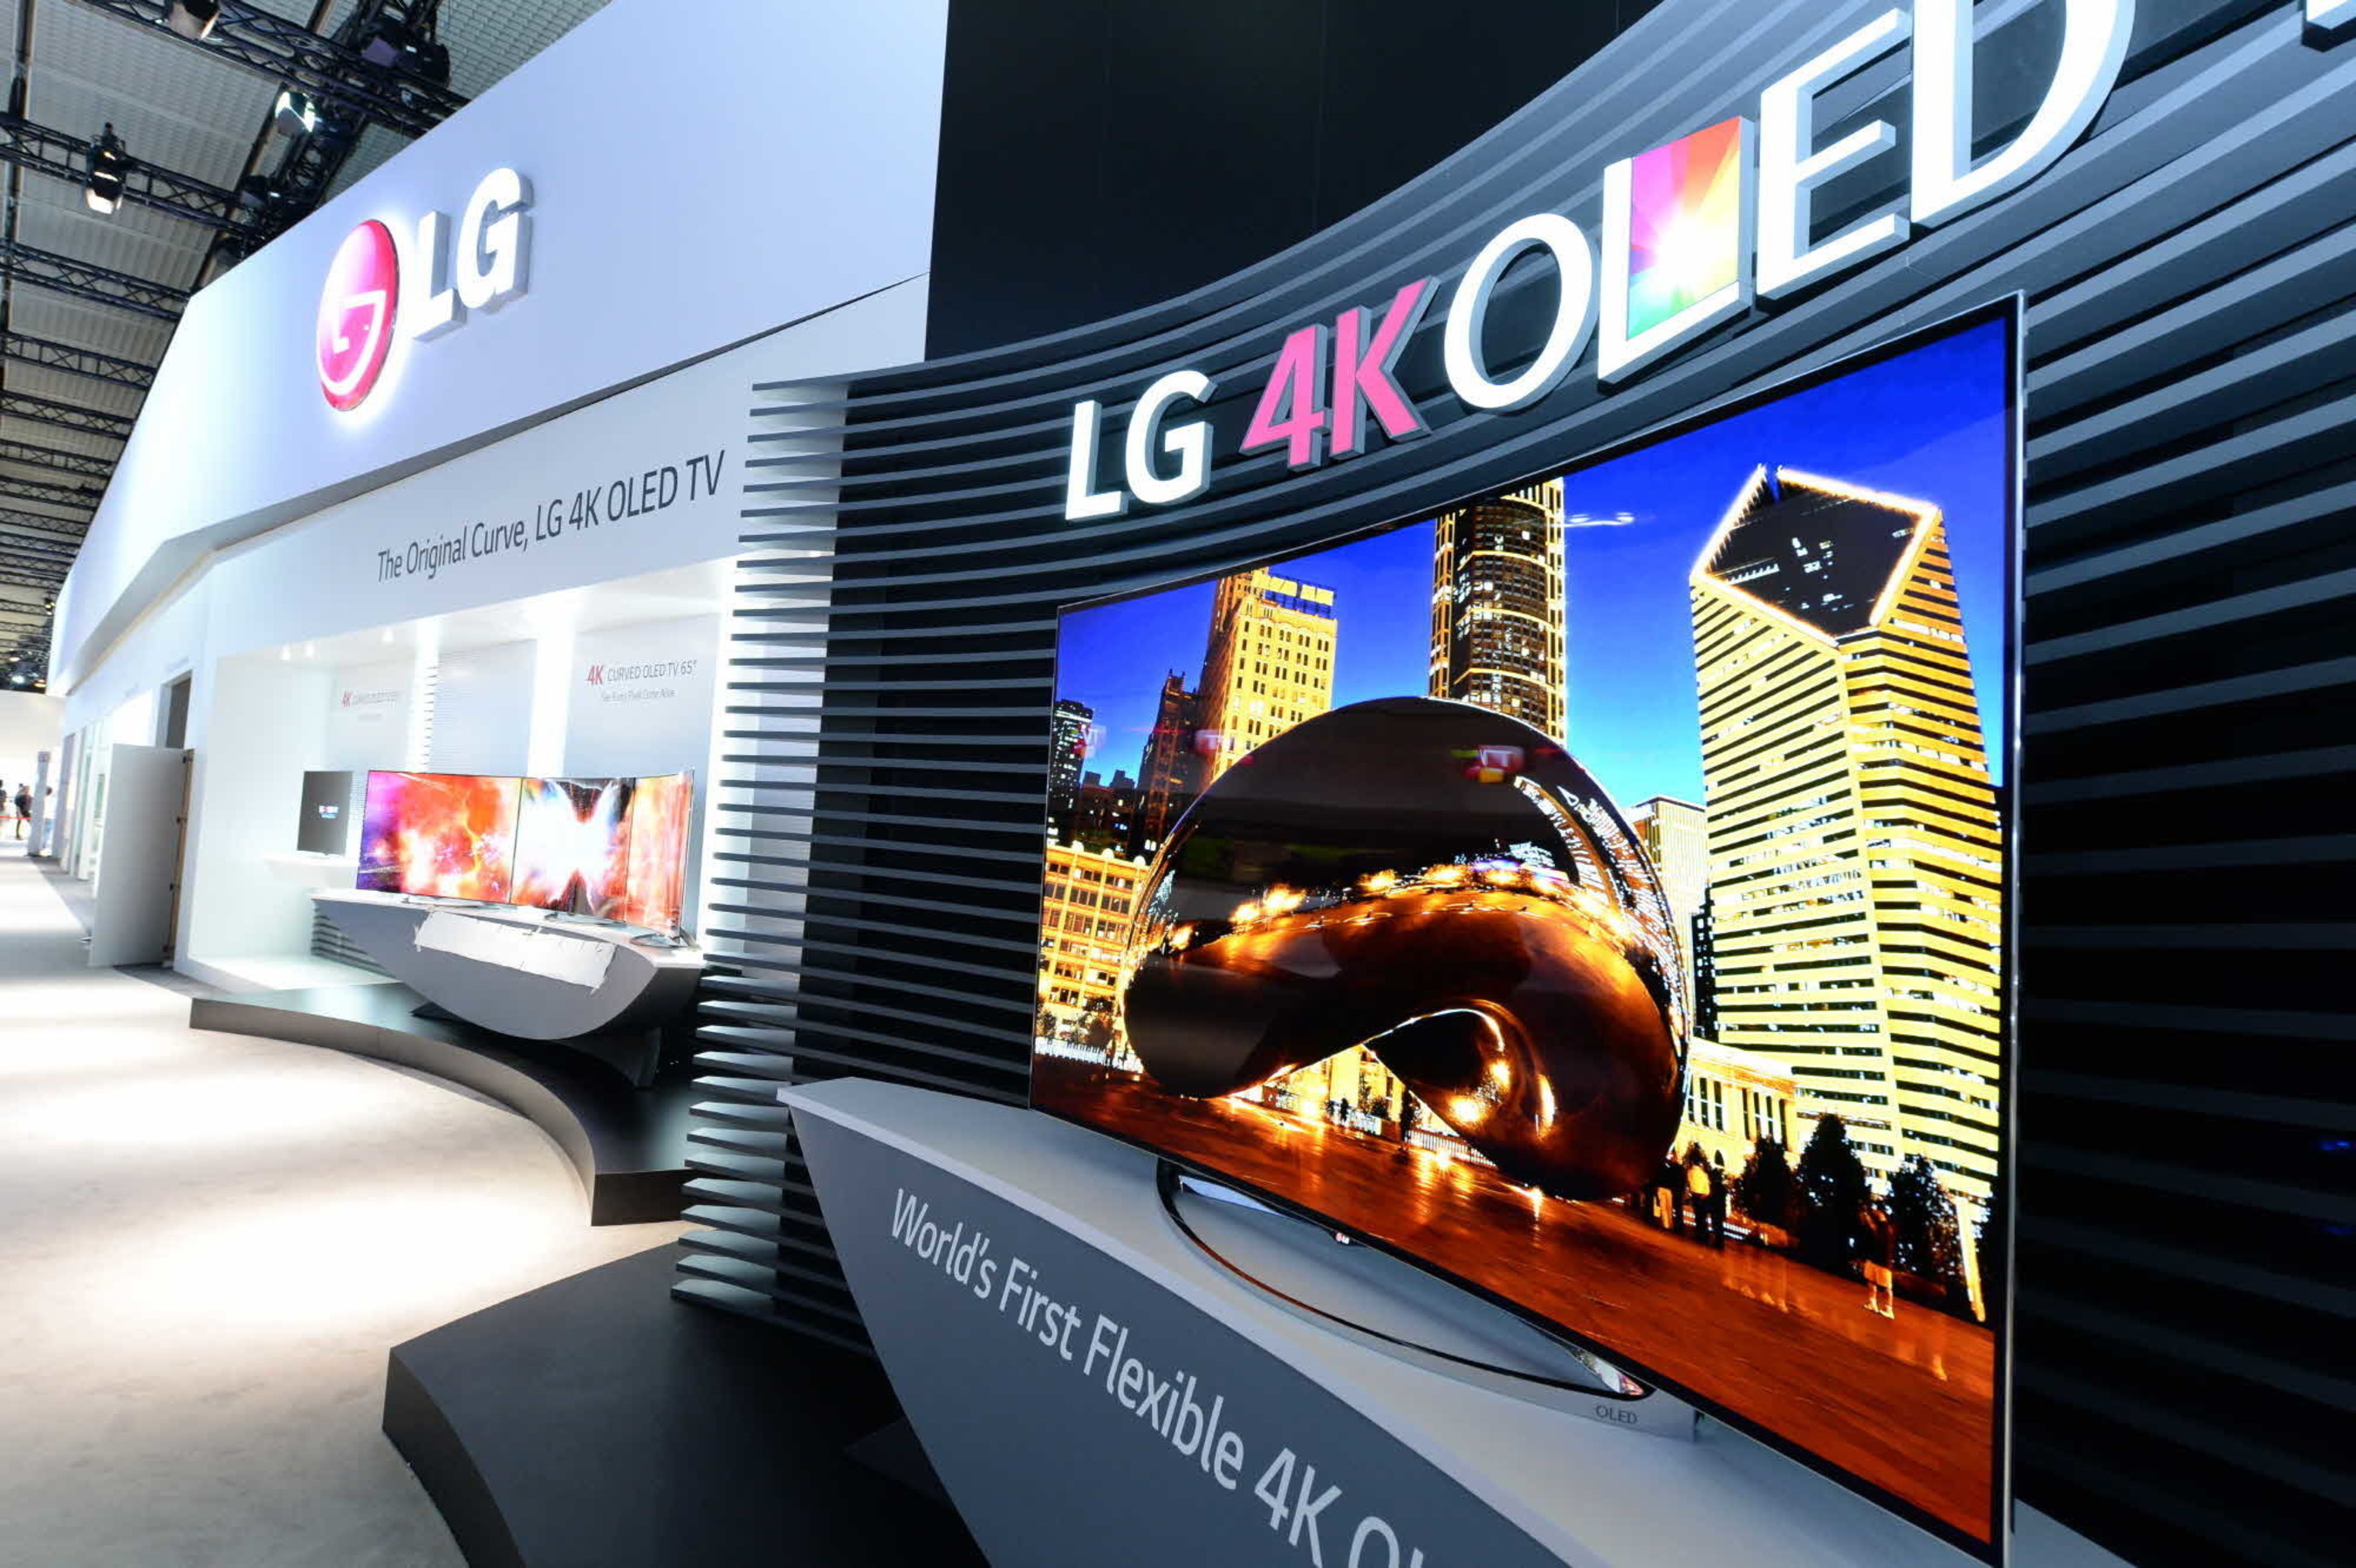 LG's Flexible 77-inch 4K OLED TV was named a 2015 CES Innovation Awards Honoree in the Video Displays category.